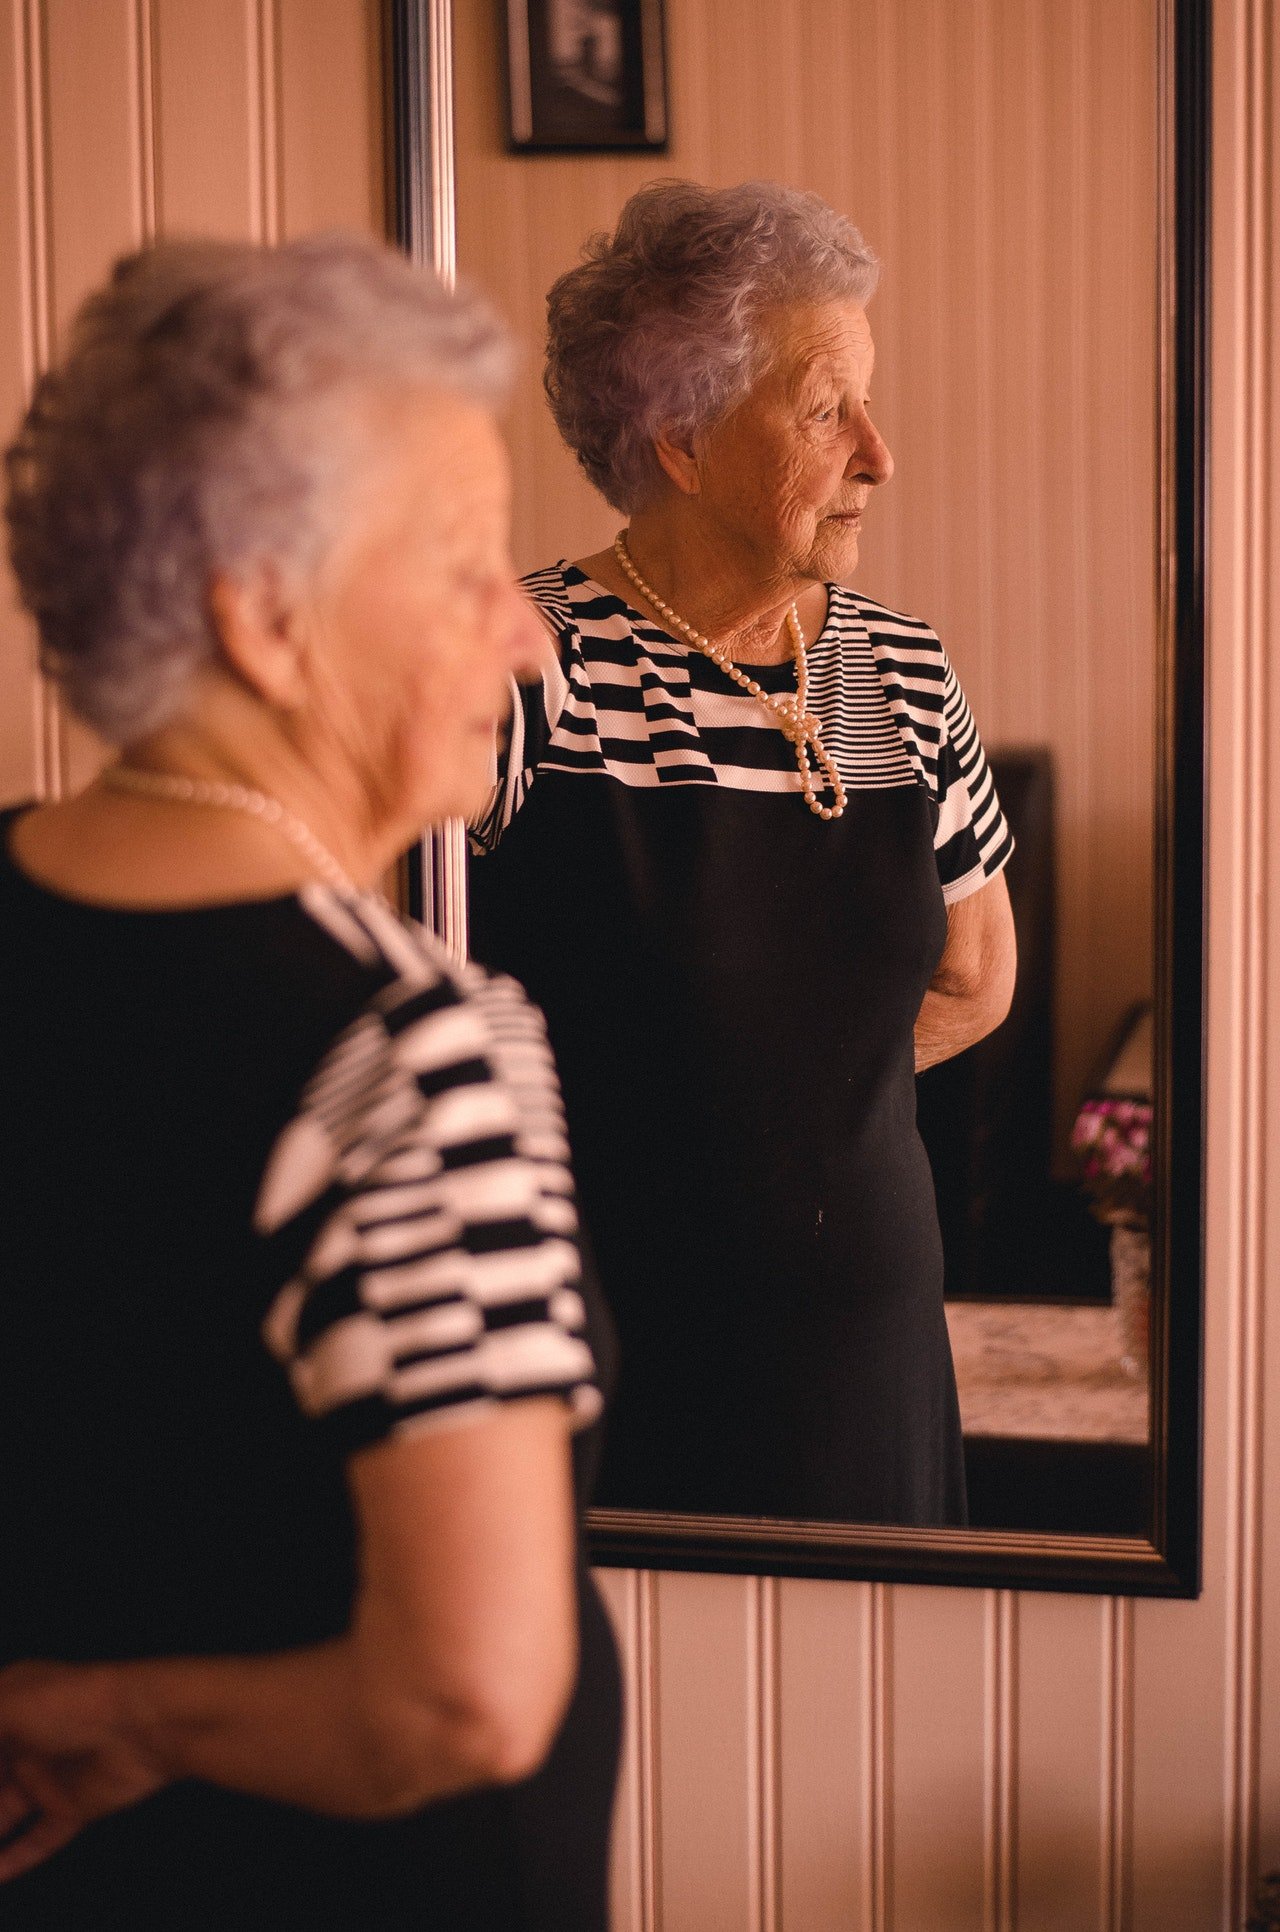 A grandmother standing in front of a mirror. | Source: Pexels